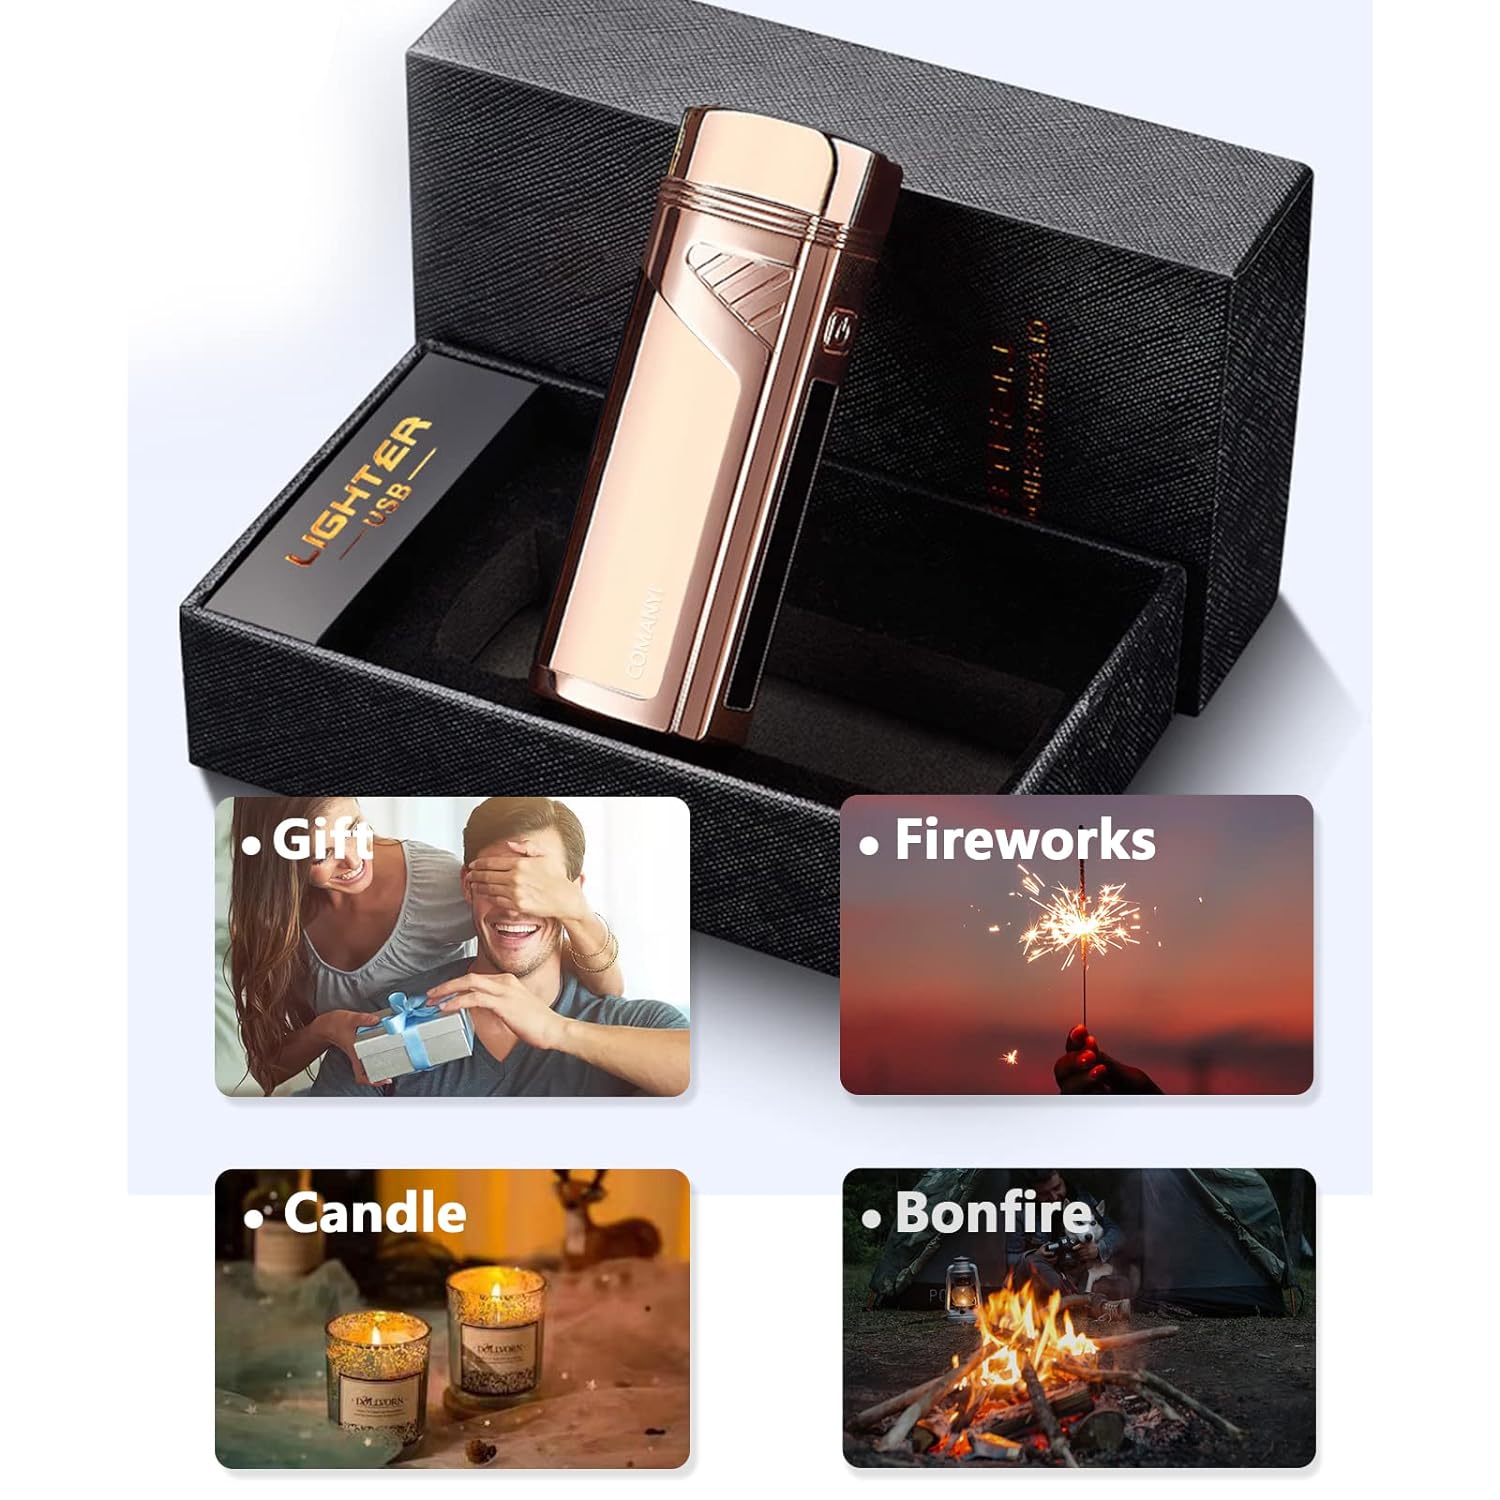 COMANYI Triple-Arc Electric Lighter, 2-in-1 Opener Windproof Lighter Flameless Plasma Lighter Rechargeable USB Lighter with Digital Battery Indicator. (Gold)